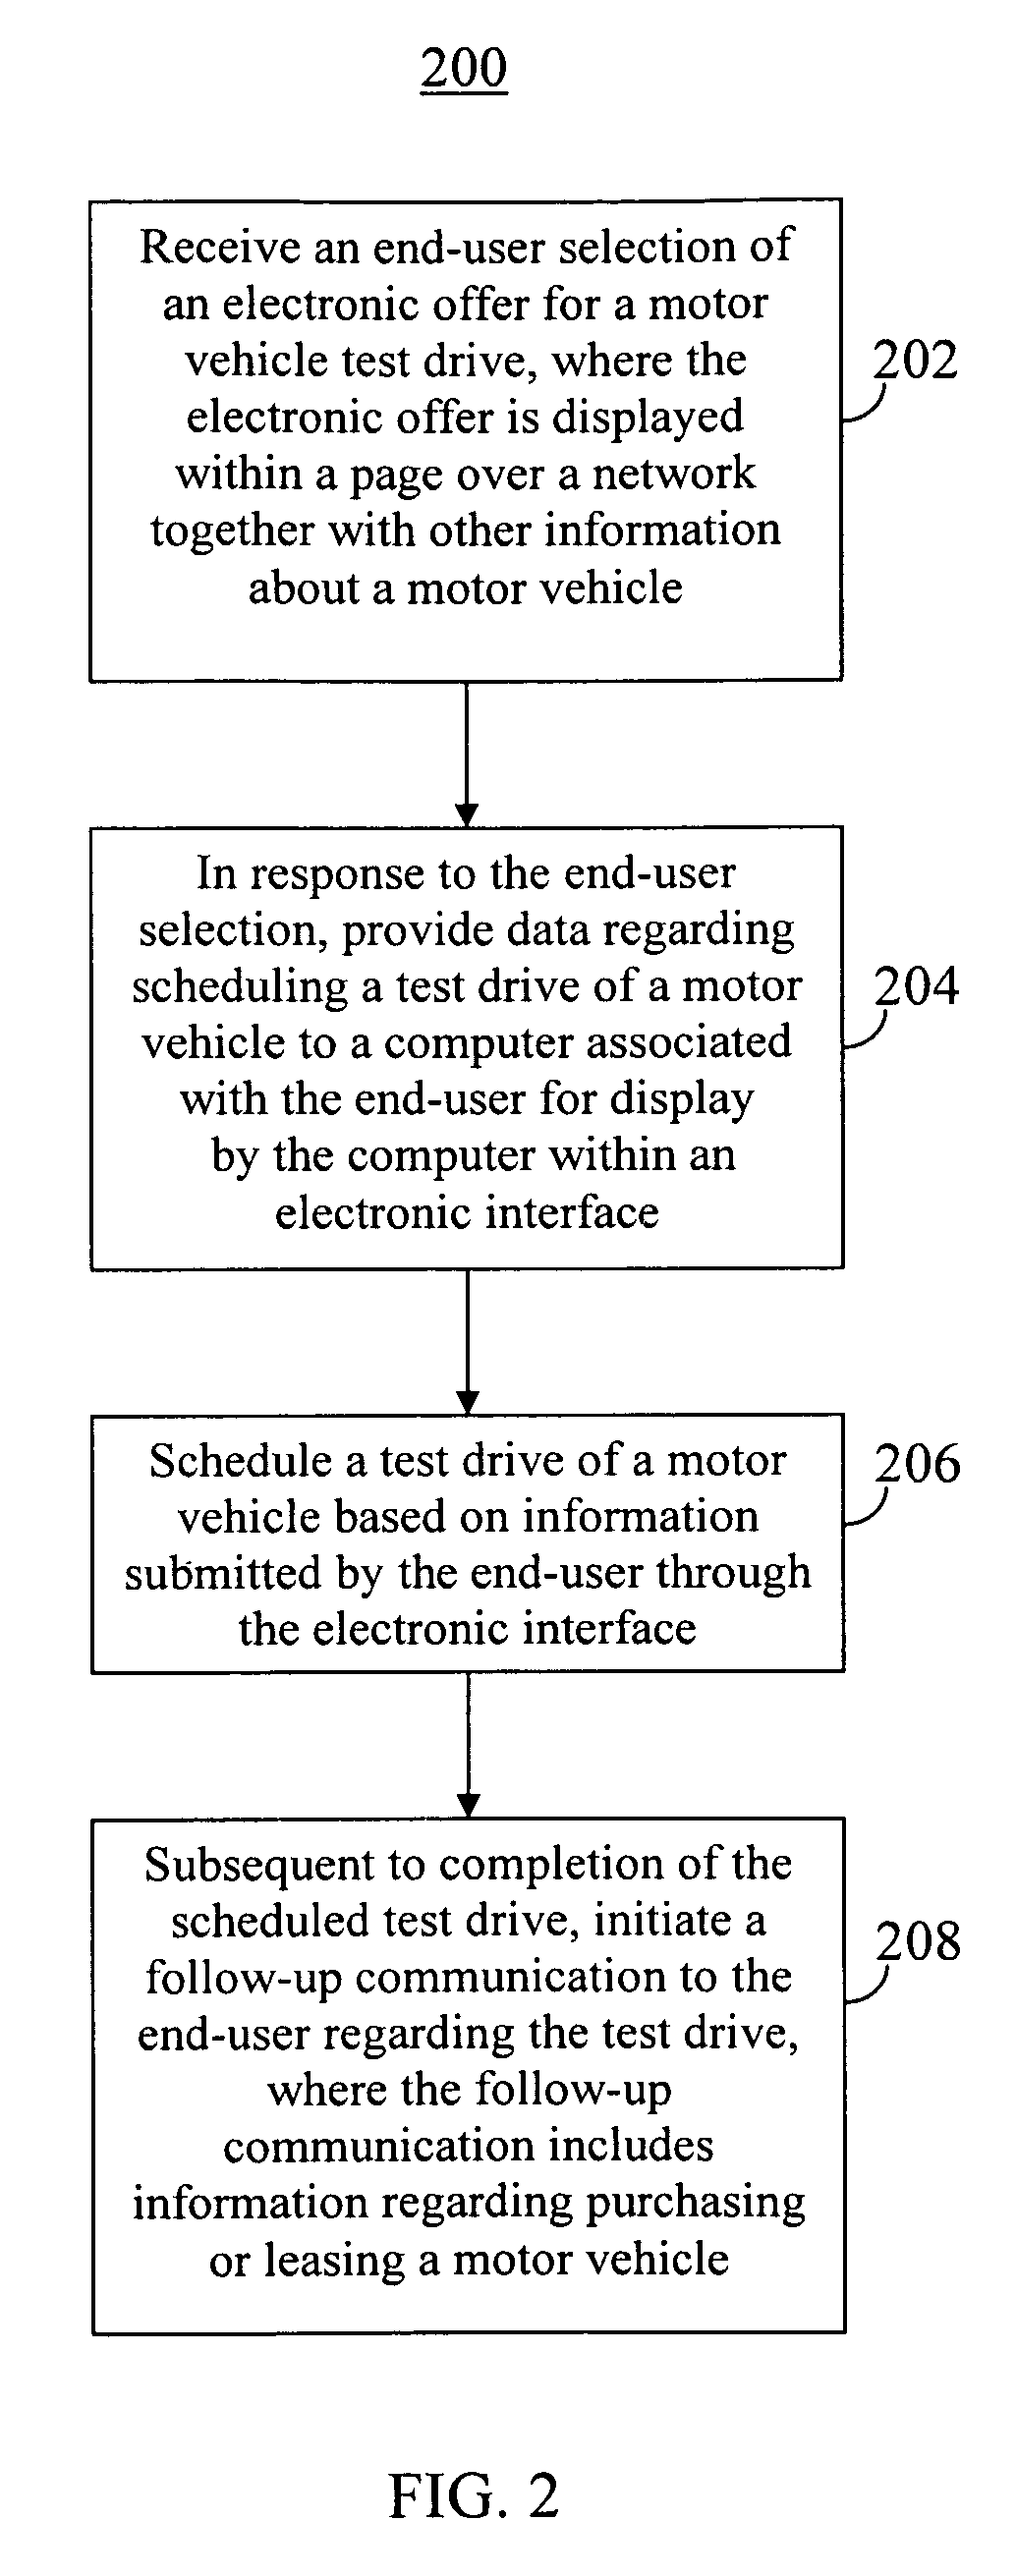 Systems and methods for offering, scheduling, and coordinating follow-up communications regarding test drives of motor vehicles